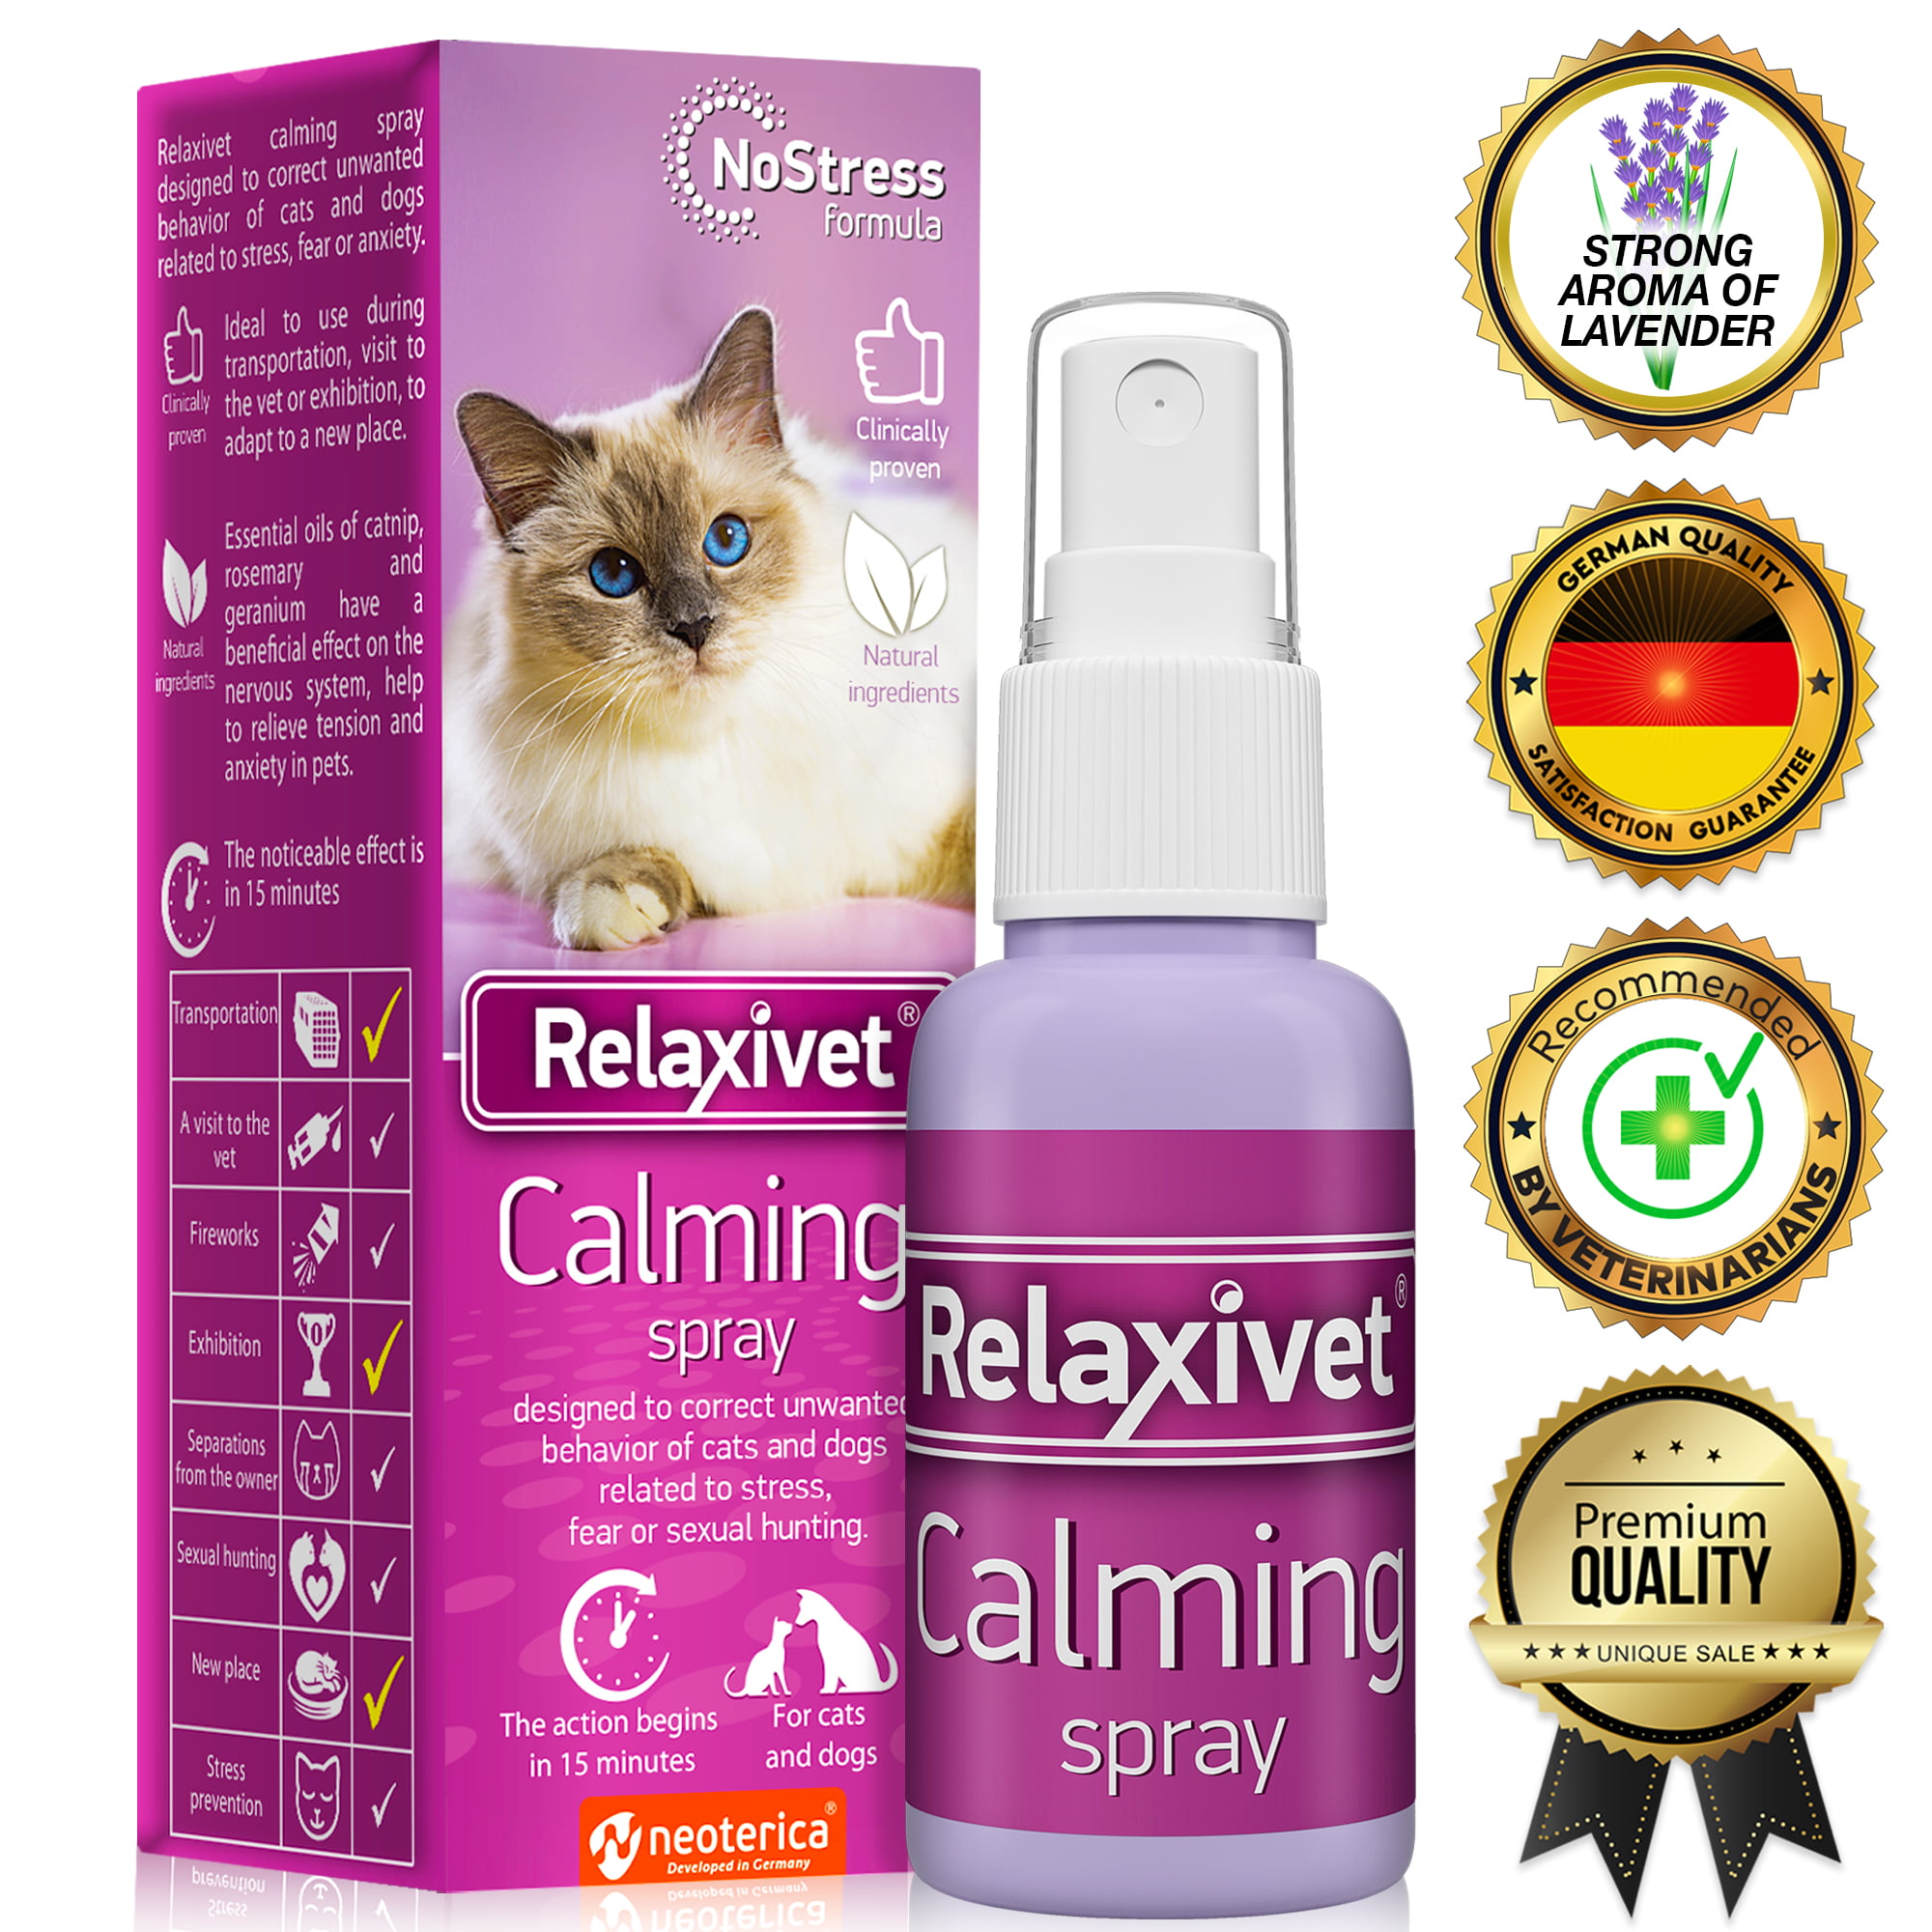 Relaxivet Natural Calming Spray for Cats and Dogs with a LongLasting